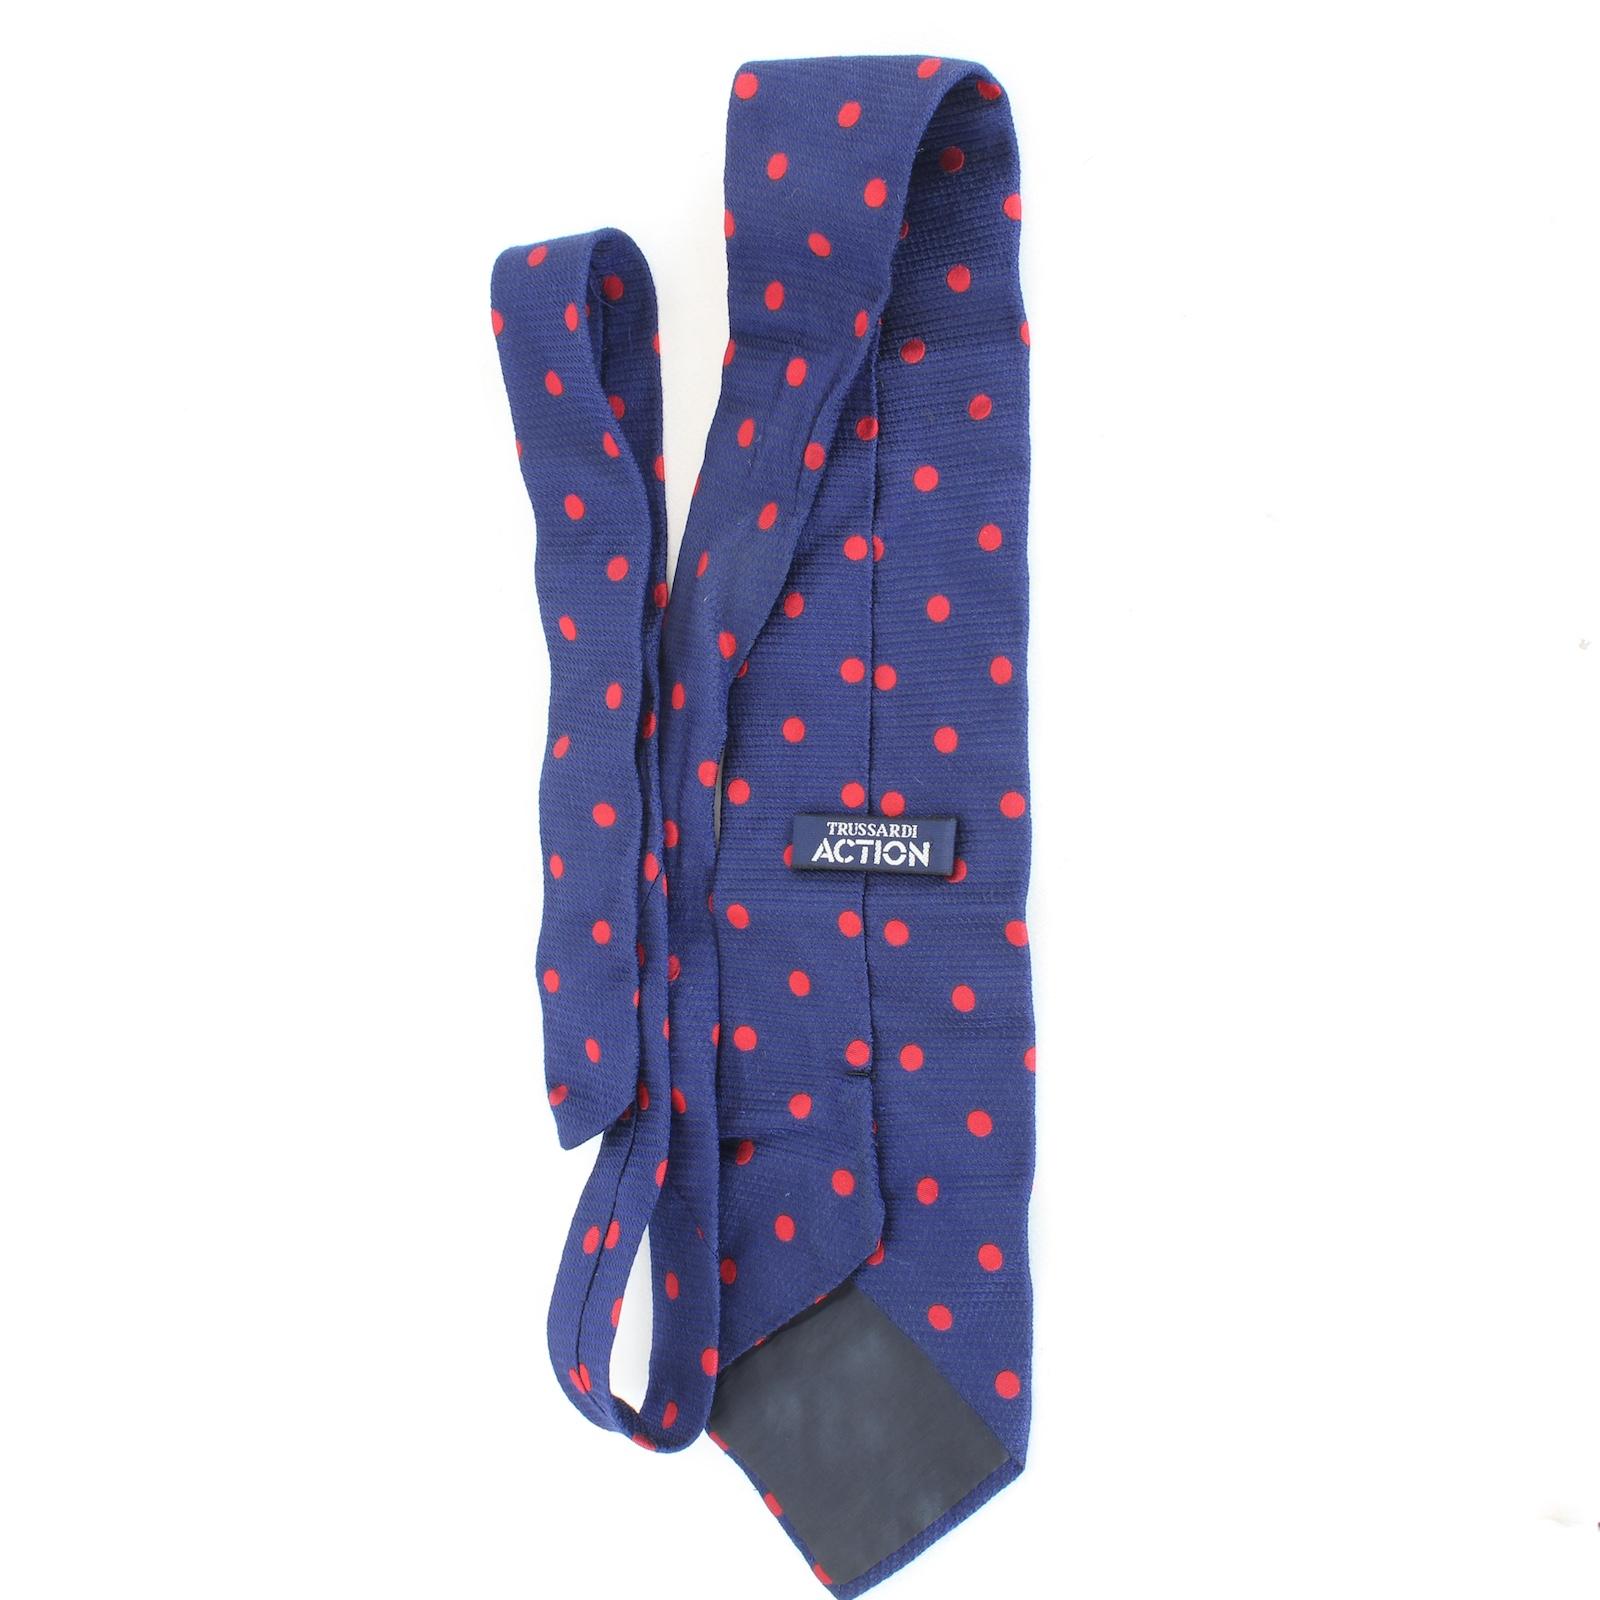 Trussardi elegant vintage 90s tie. Blue and red color with polka dot pattern, 100% silk fabric. Made in italy.

Length: 146 cm
Width: 10 cm